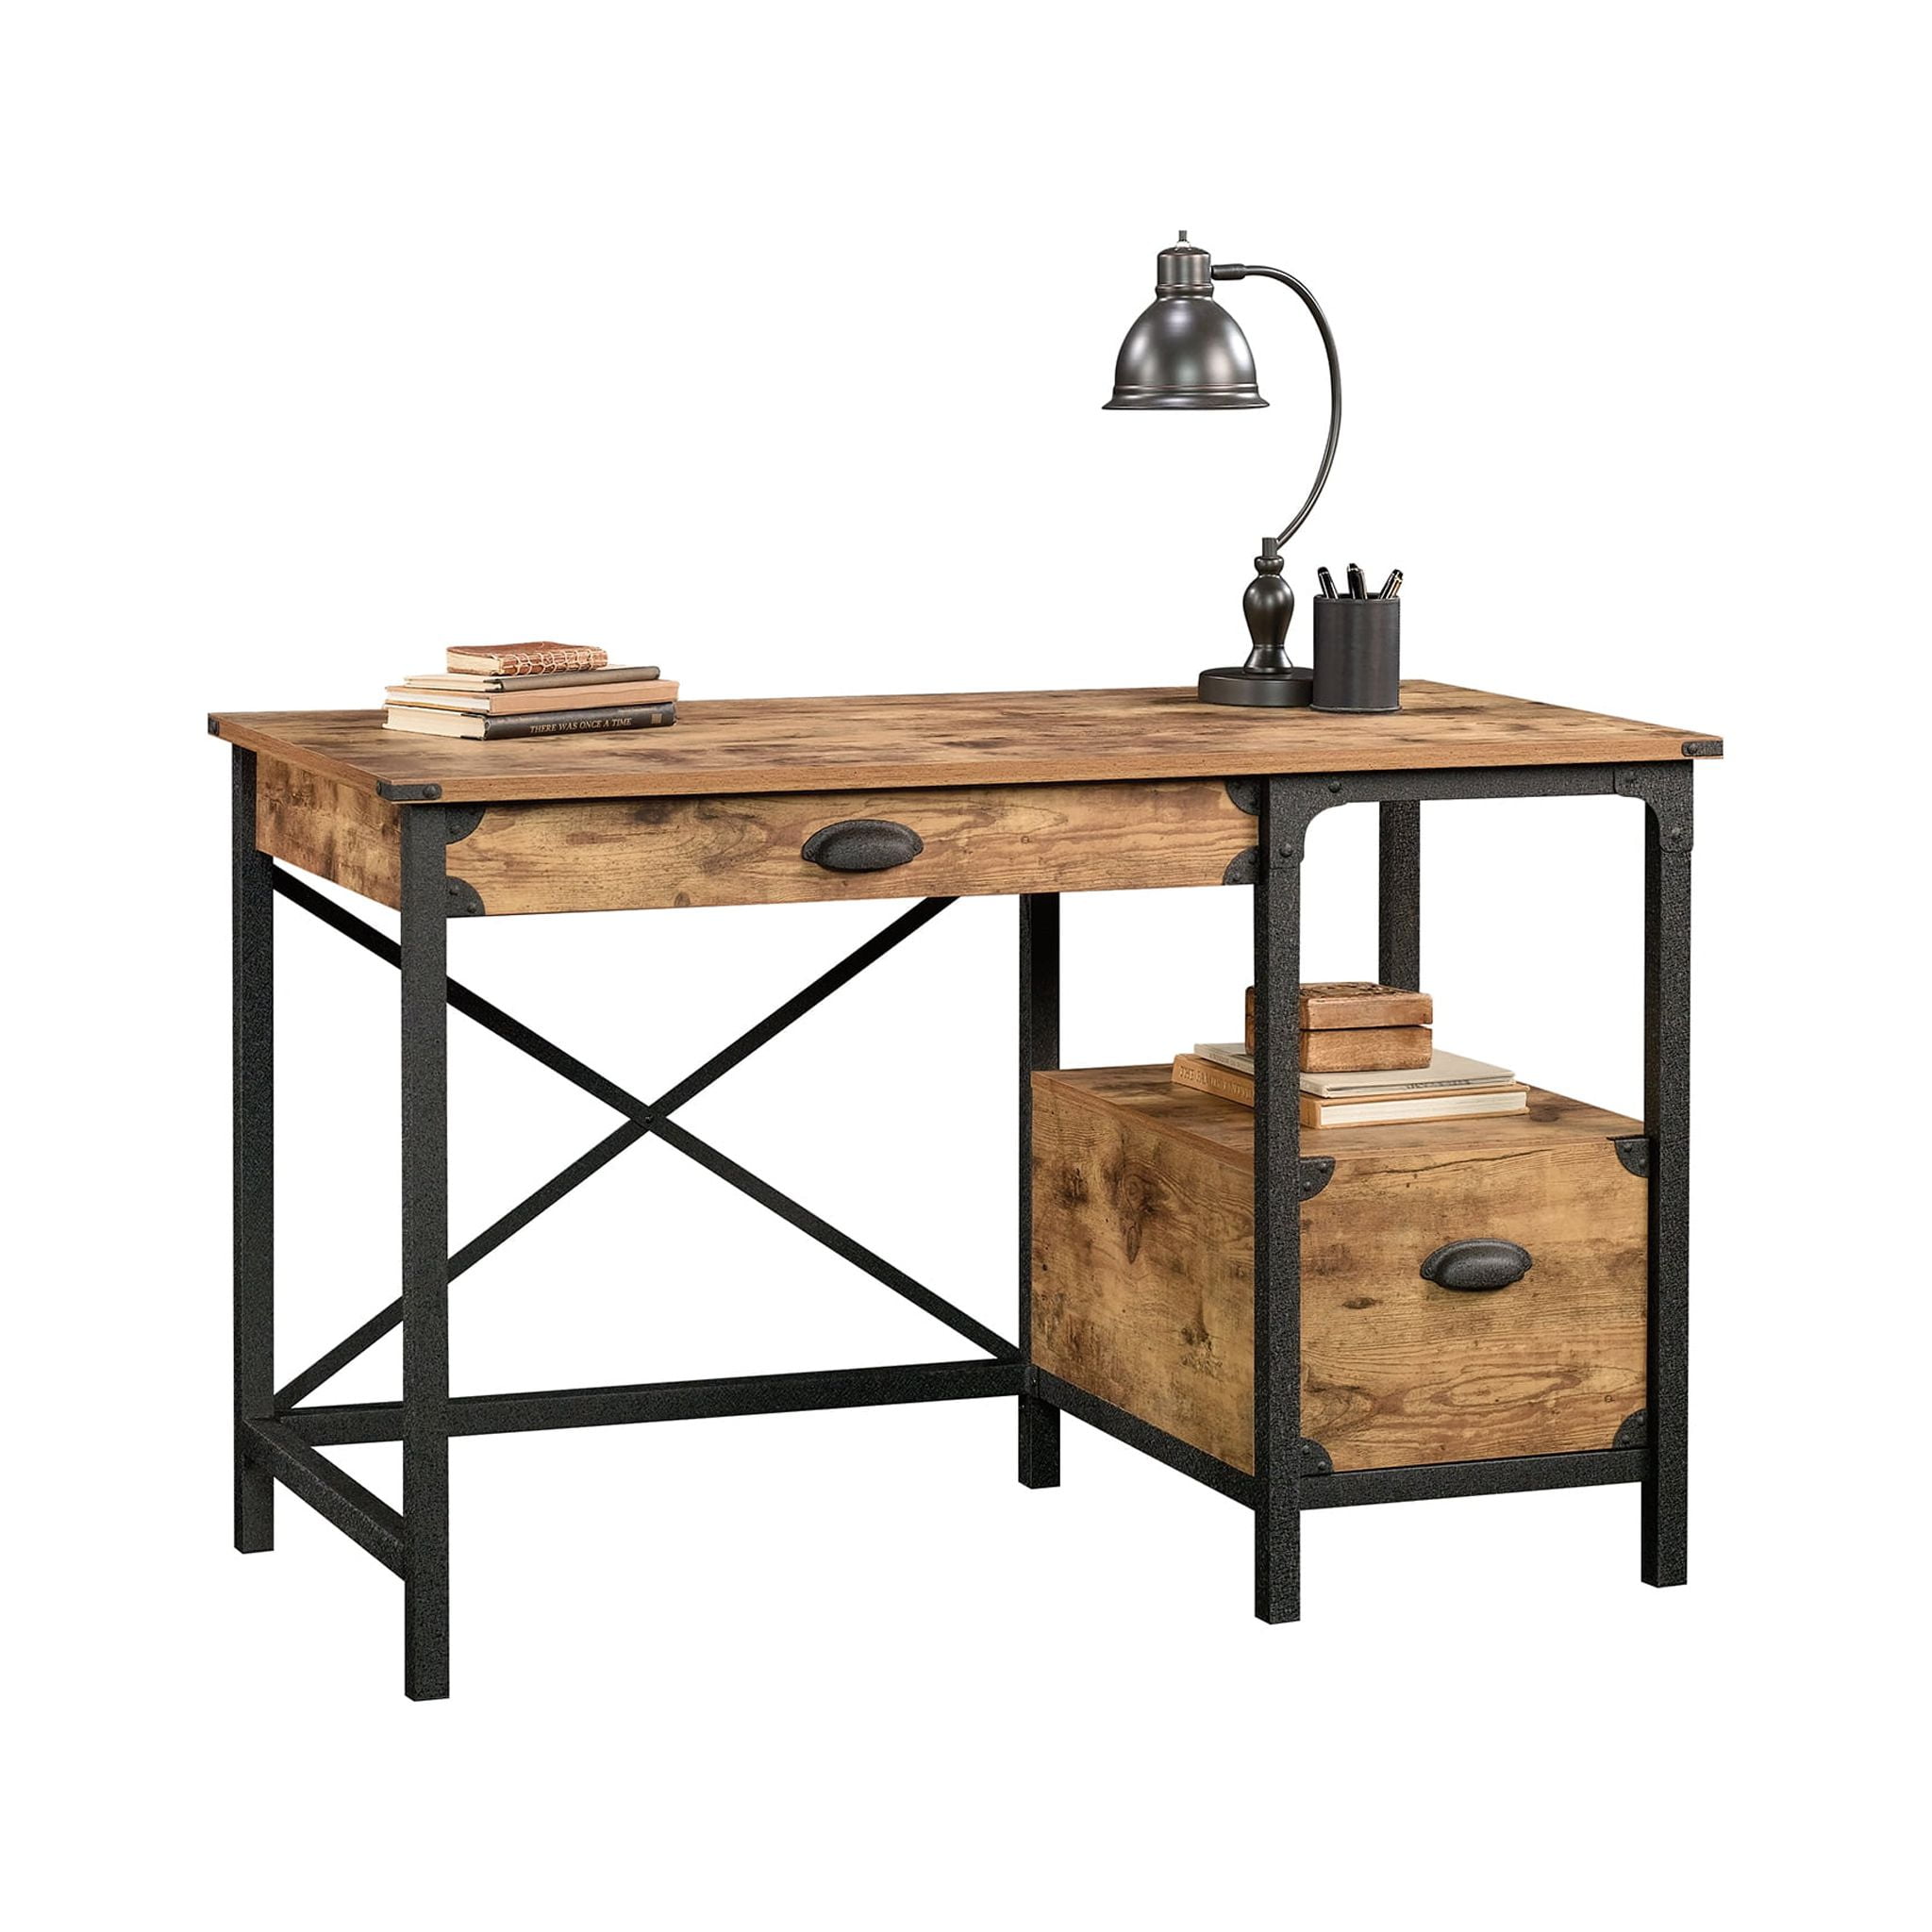 Better Homes & Gardens Rustic Country Desk (Weathered Pine Finish) $85 + Free Shipping